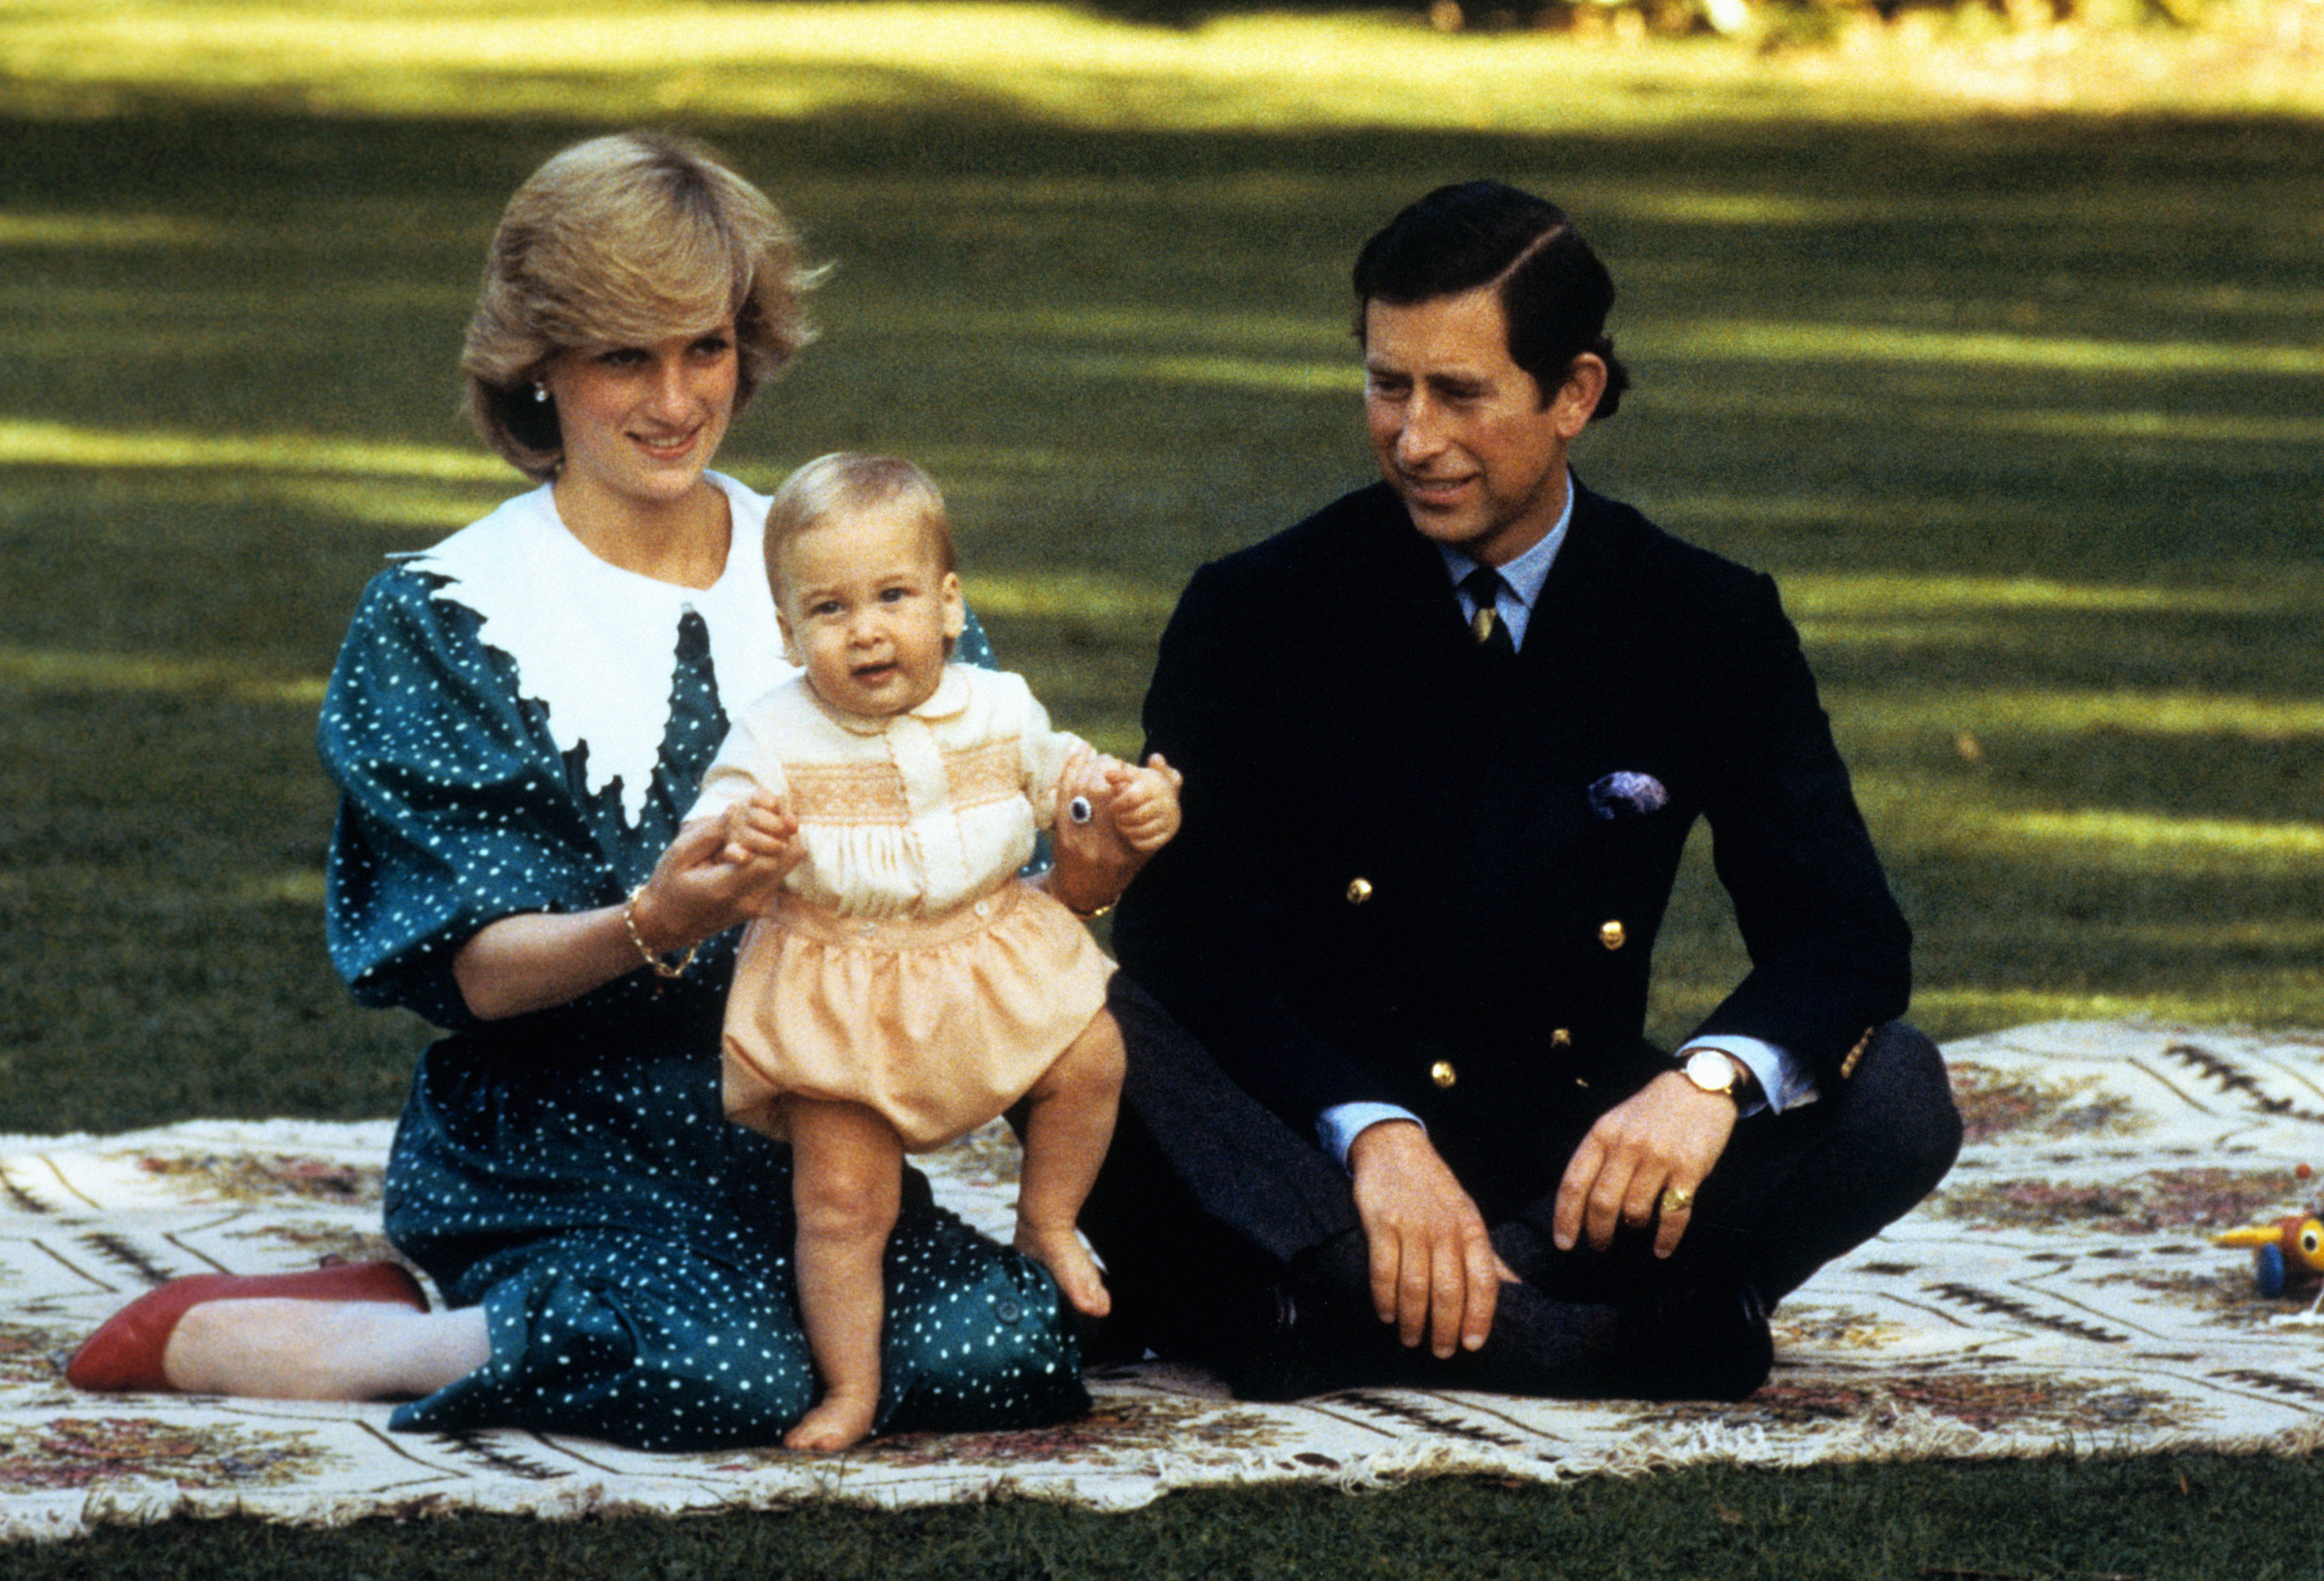 The Prince and Princess of Wales amuse baby Prince William in the grounds of Government House in Auckland, New Zealand in 1983